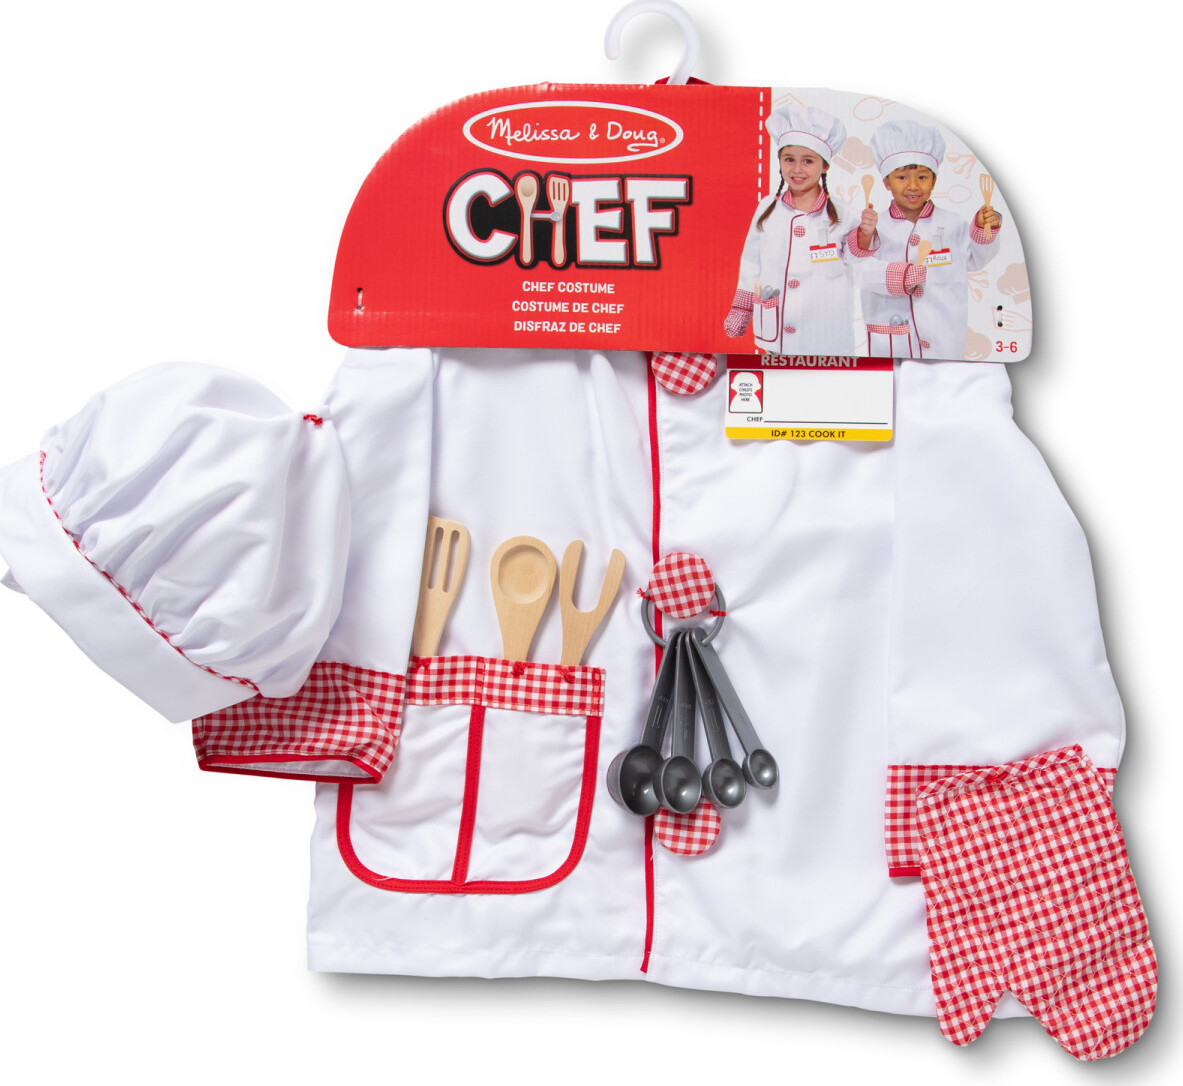 Little Chefs in The Kitchen - Measuring Set